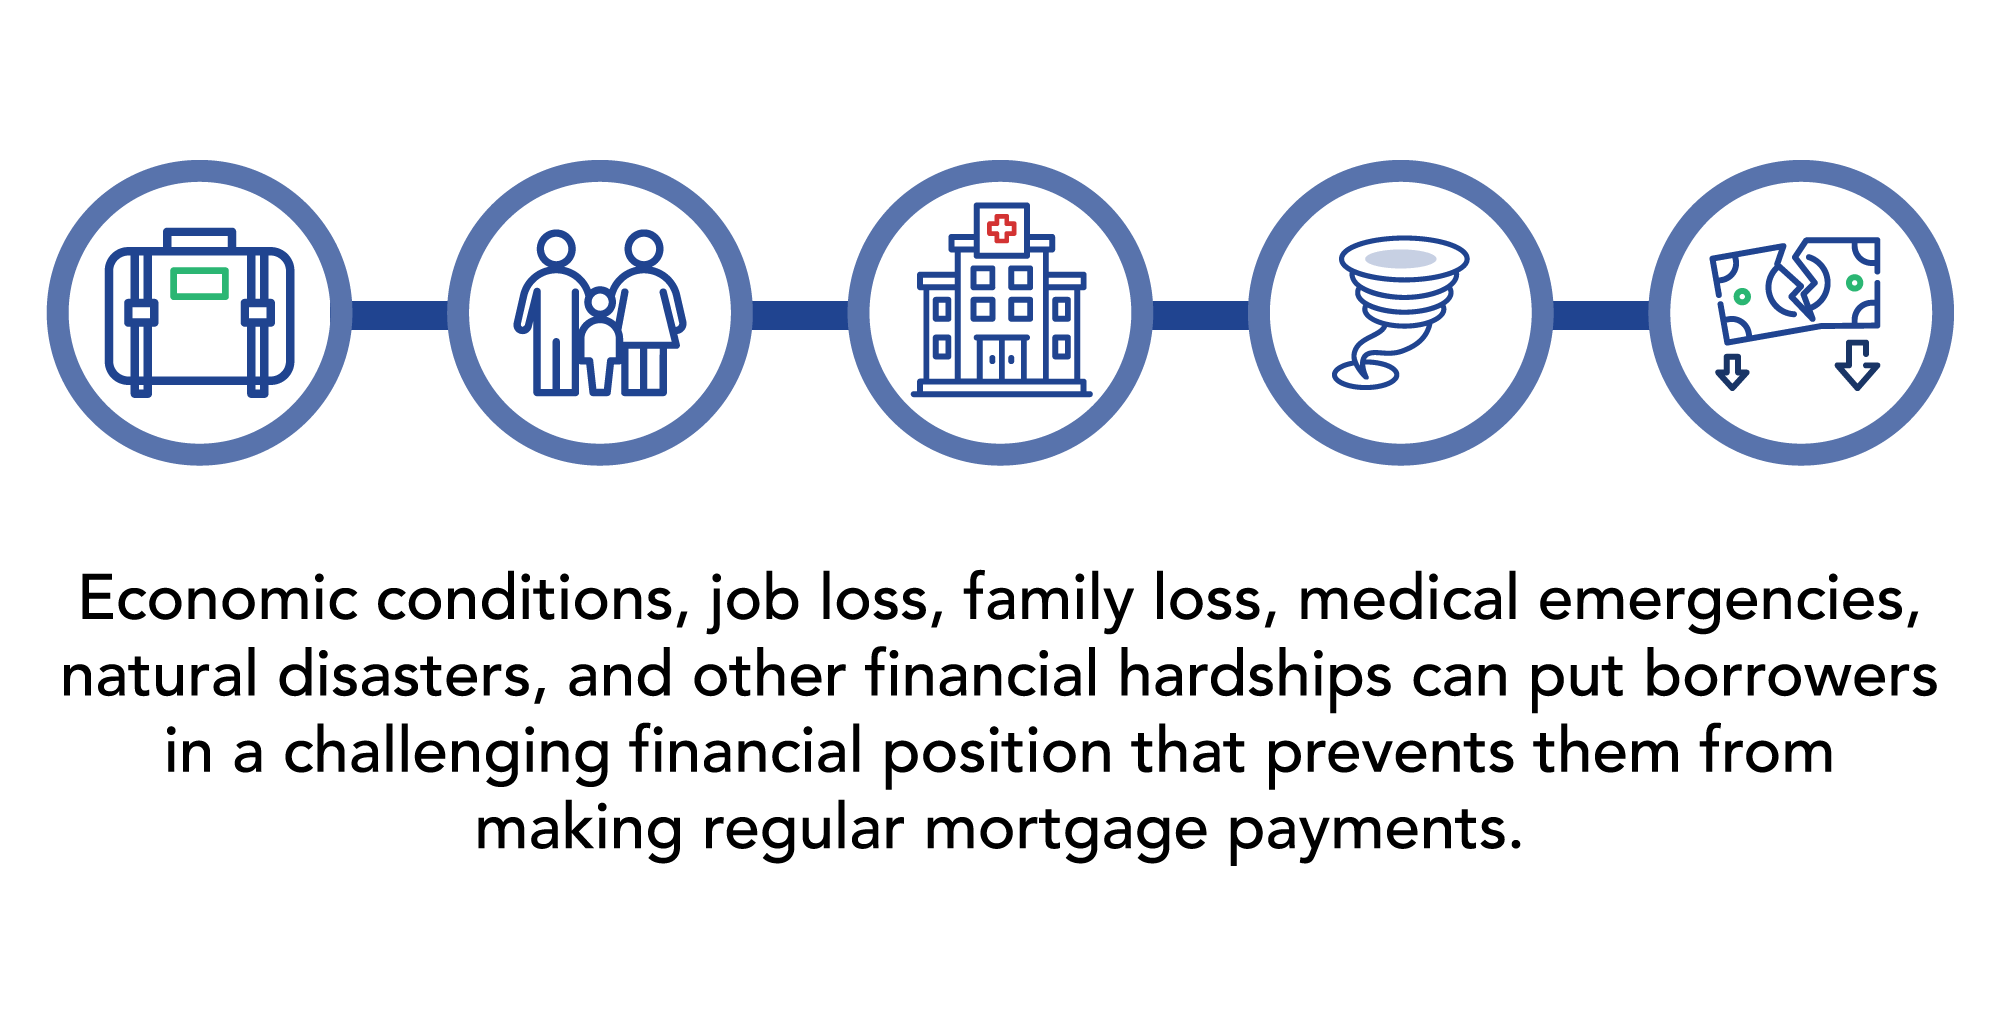 Discover how FinLocker can help you turn around your turn downed applicants, so they'll return to you with a stronger mortgage application.